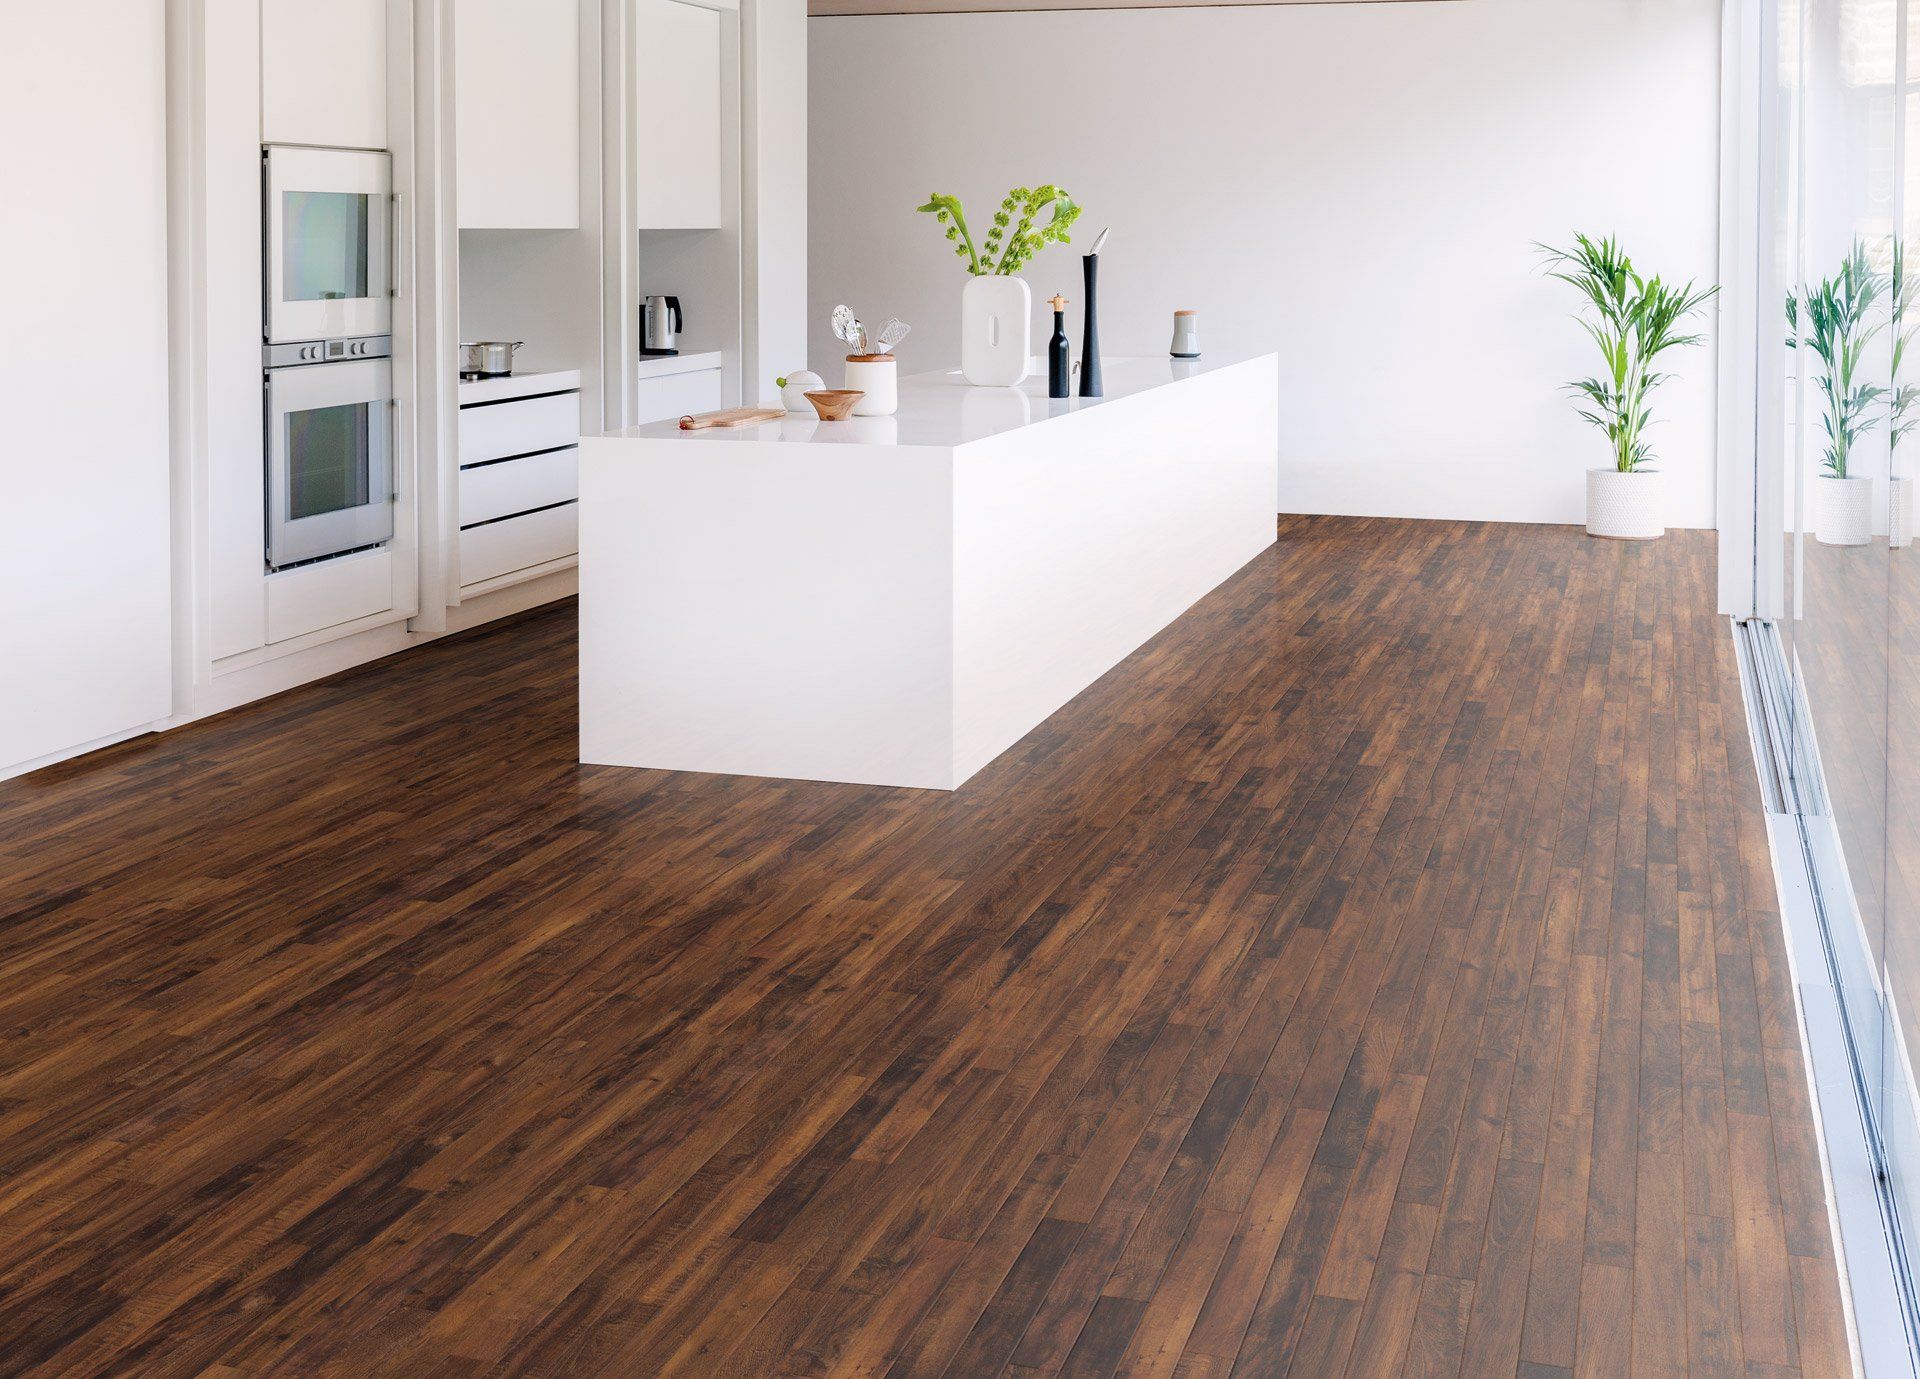 Caring for your Vinyl Floors